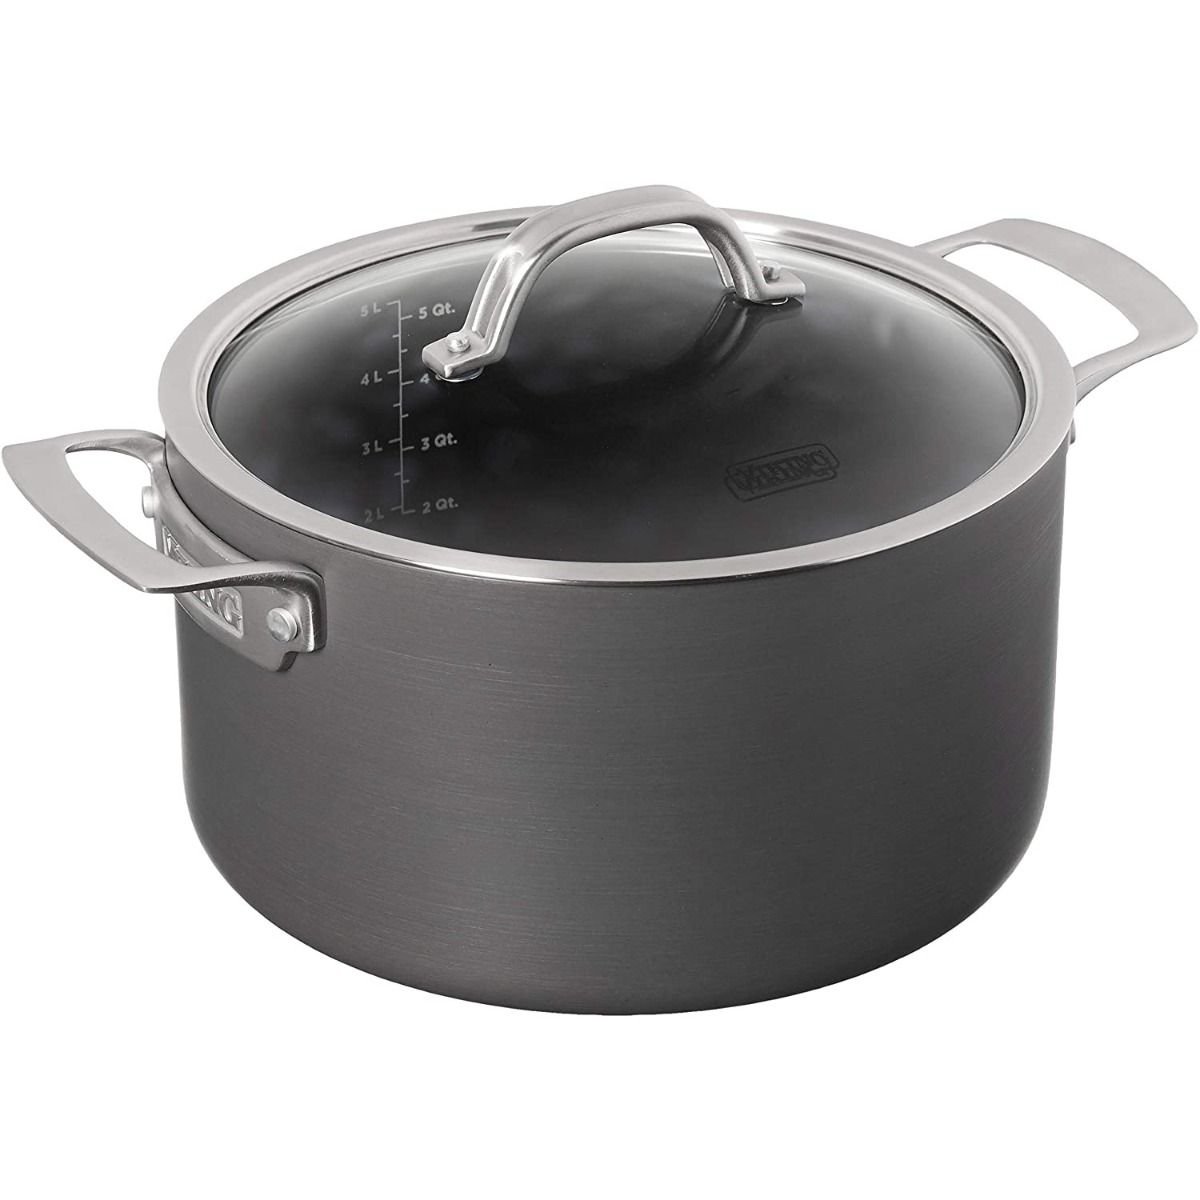 Cuisinart Mineral Stainless Steel Dutch Oven with Cover | 4 qt.